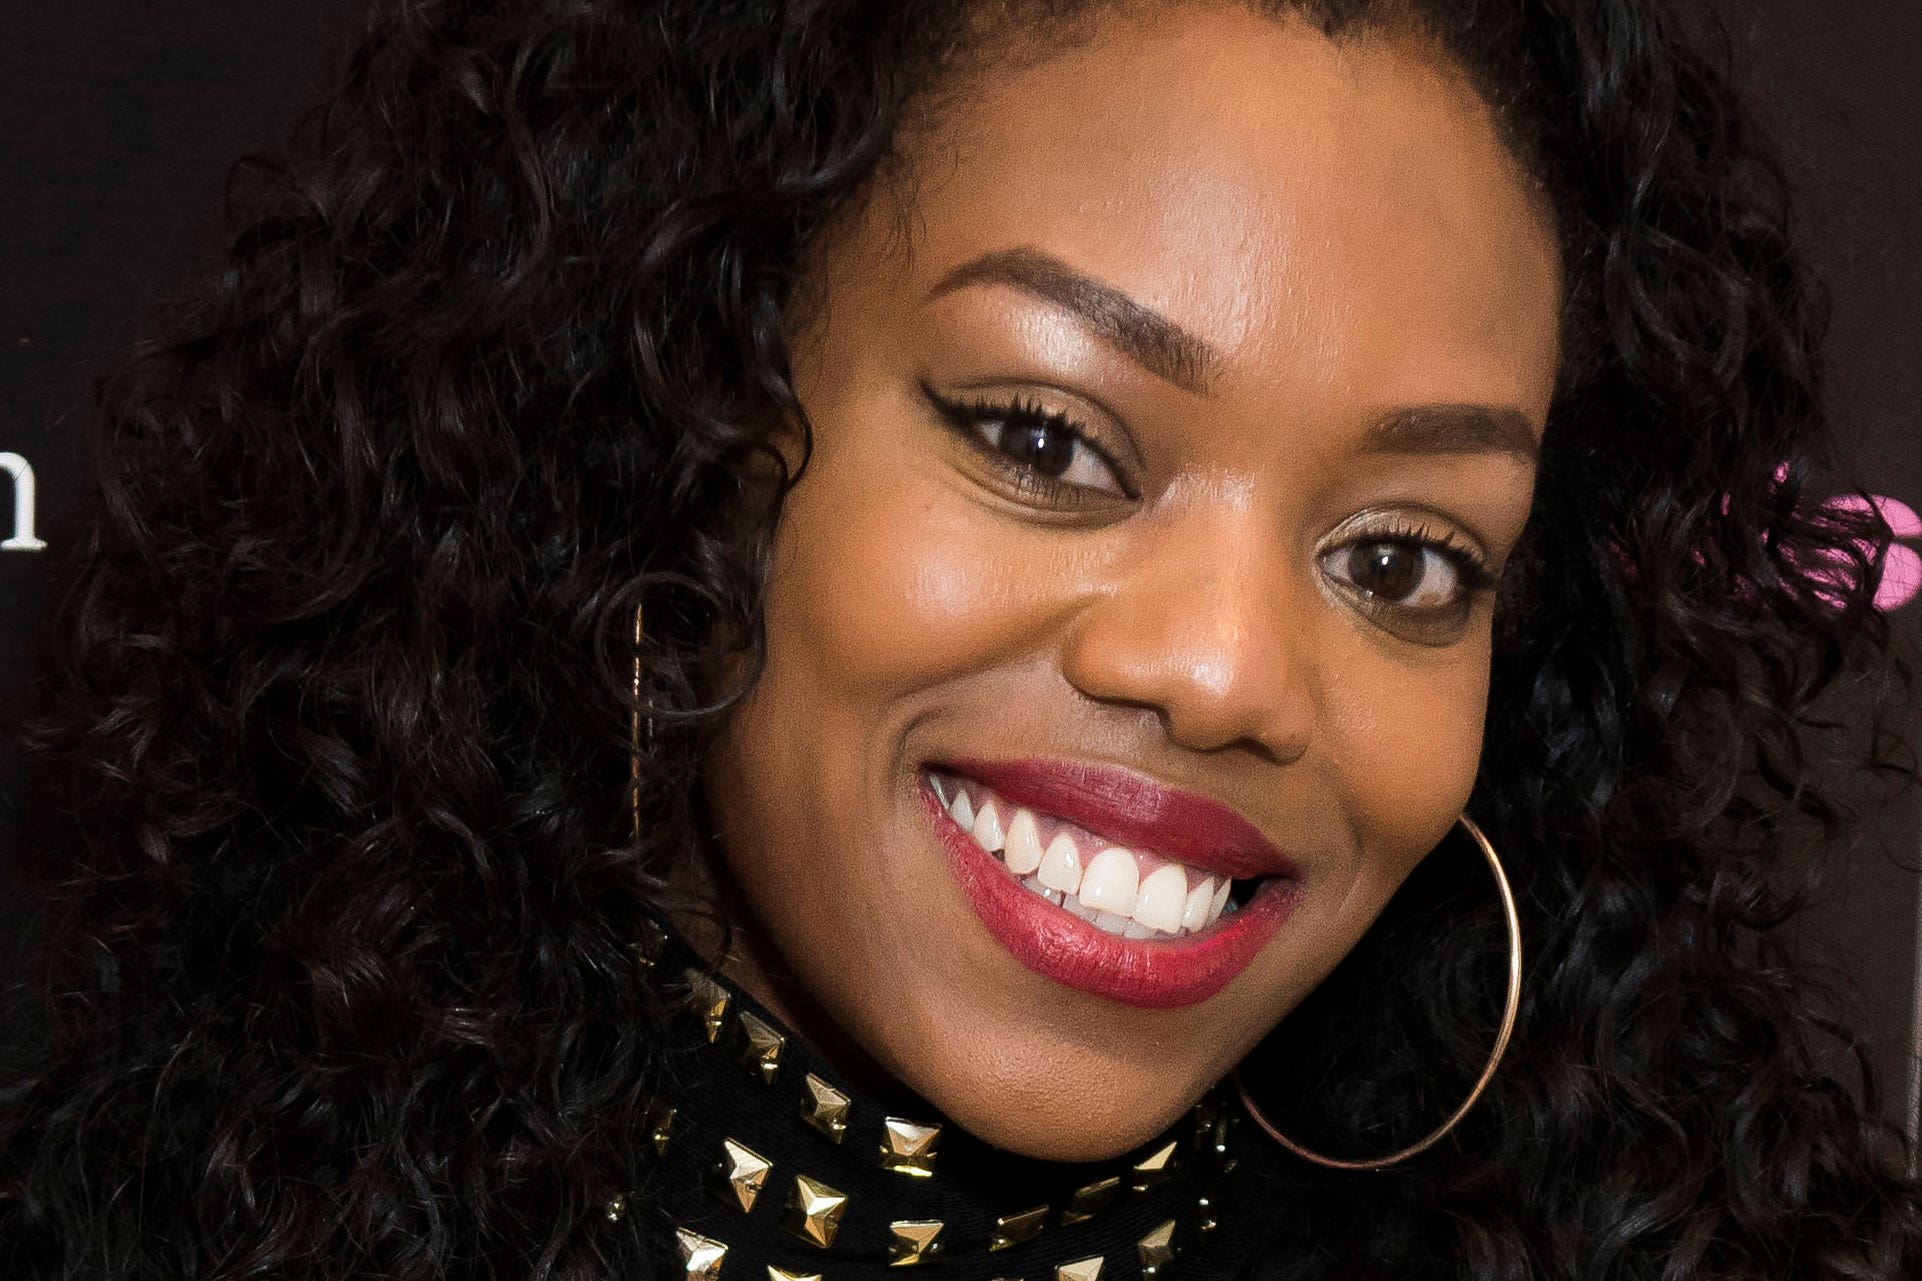 Rapper Lady Leshurr attacked her ex-girlfriend and the woman’s new partner in a late-night altercation, a court has heard